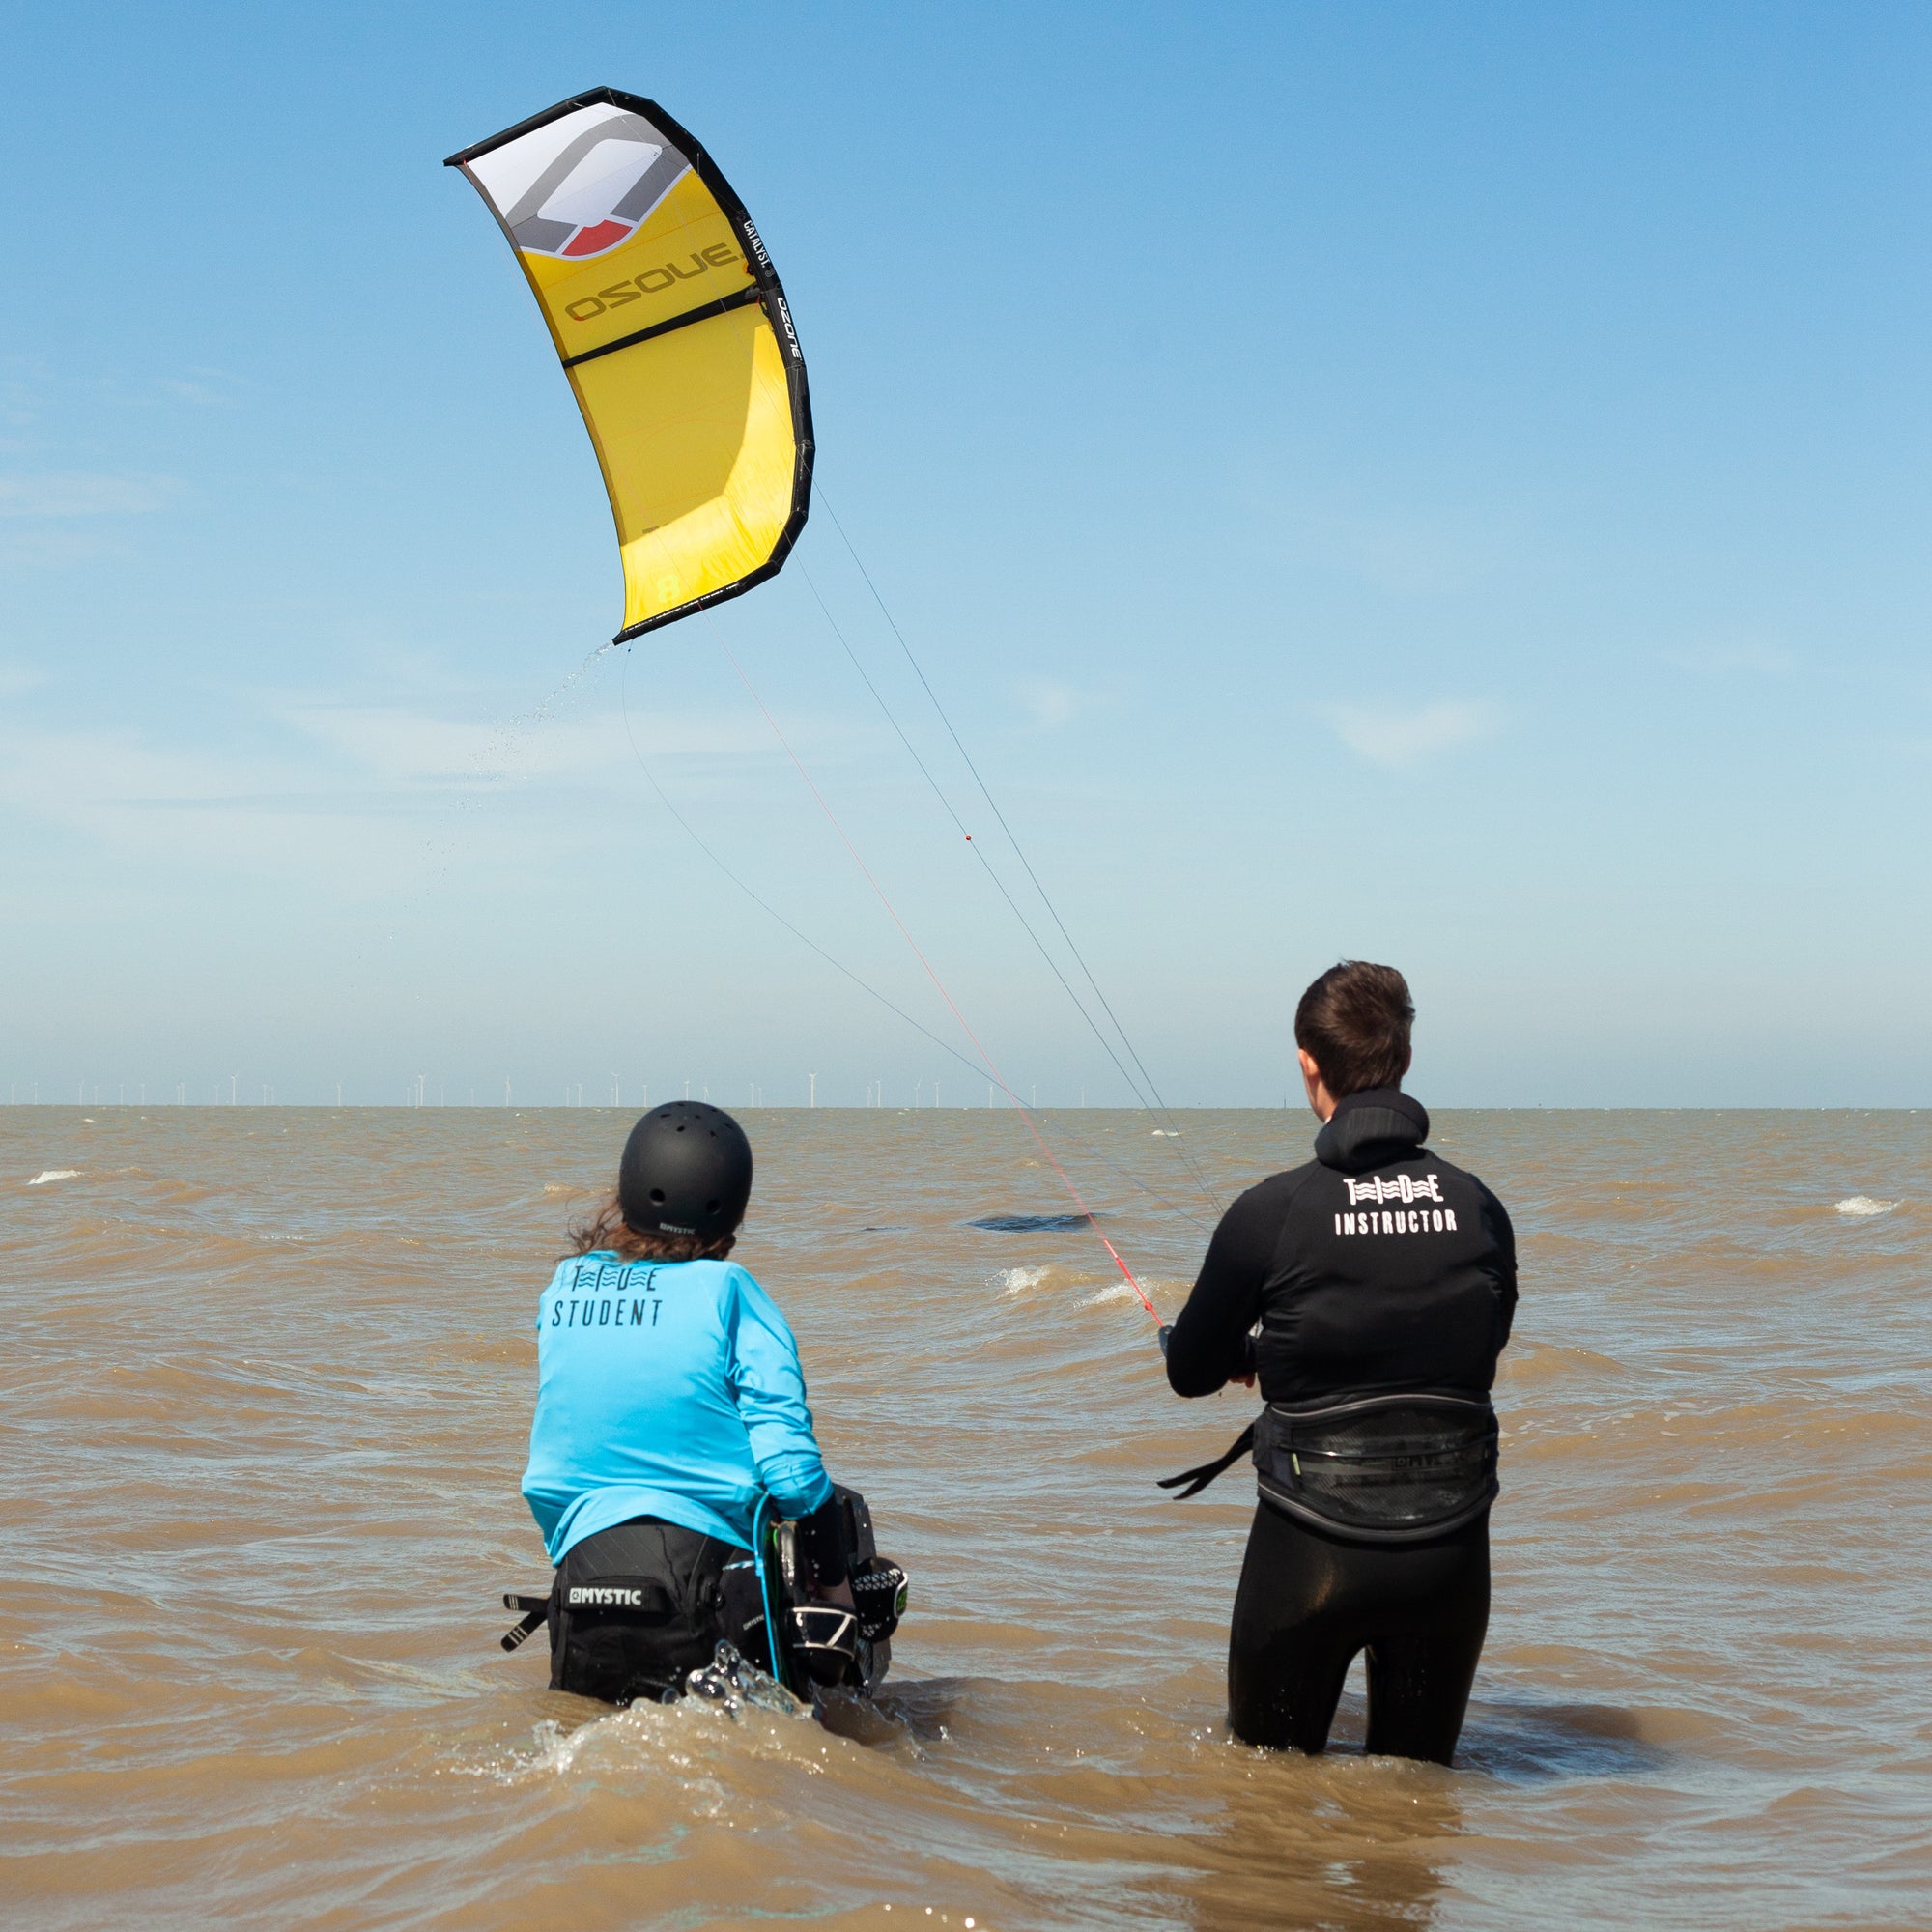 Kitesurfing instructor teaching student learning to kite  in the water whilst flying a kite.